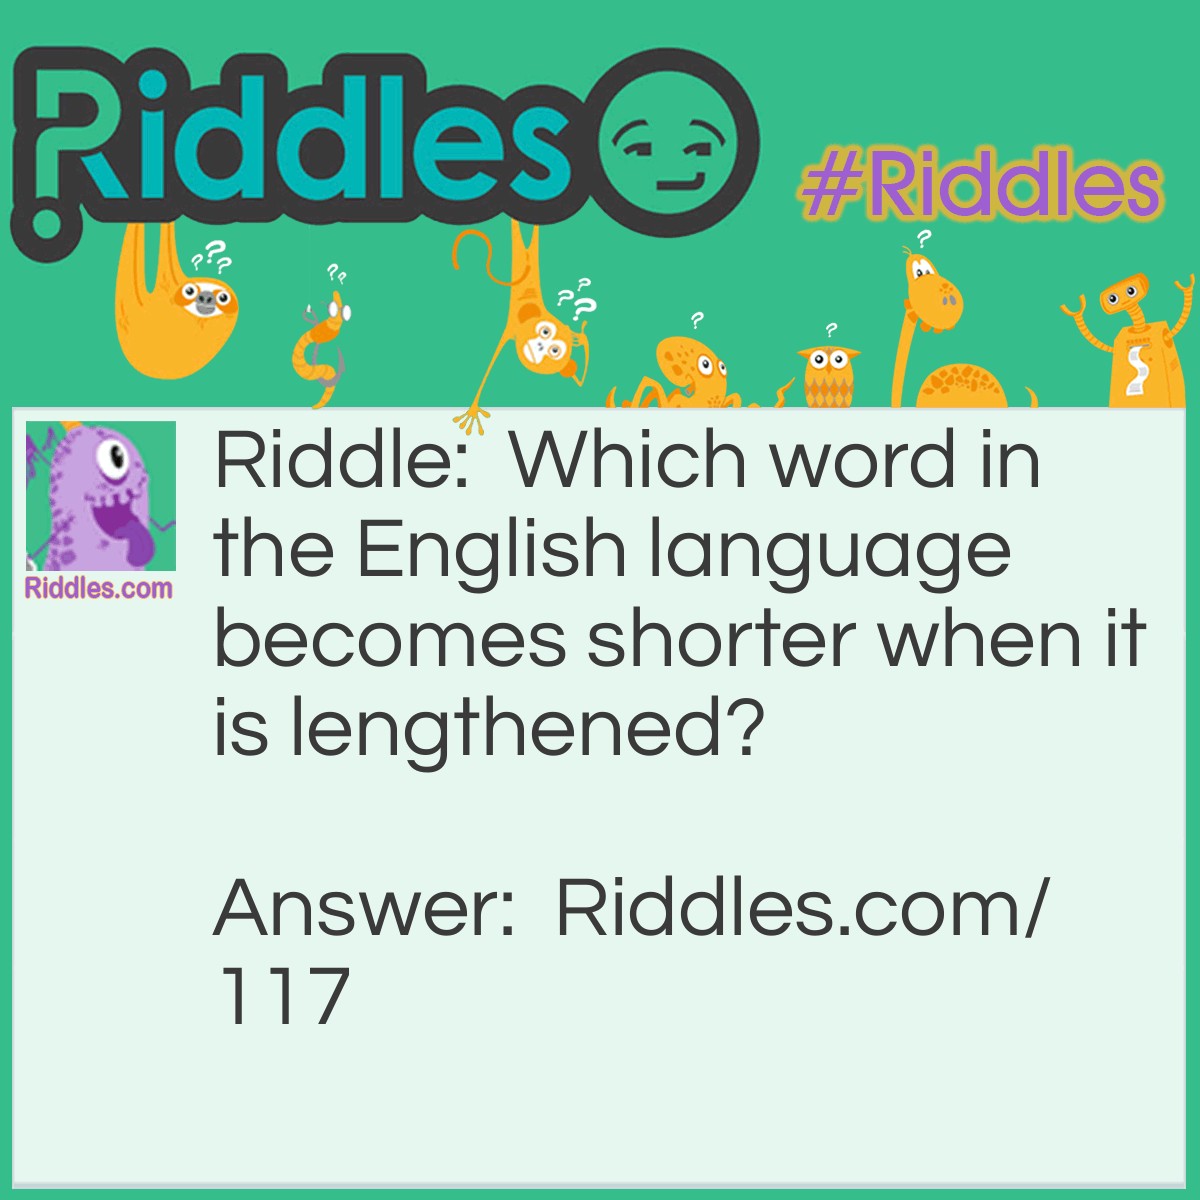 Riddle: Which word in the English language becomes shorter when it is lengthened? Answer: Short.